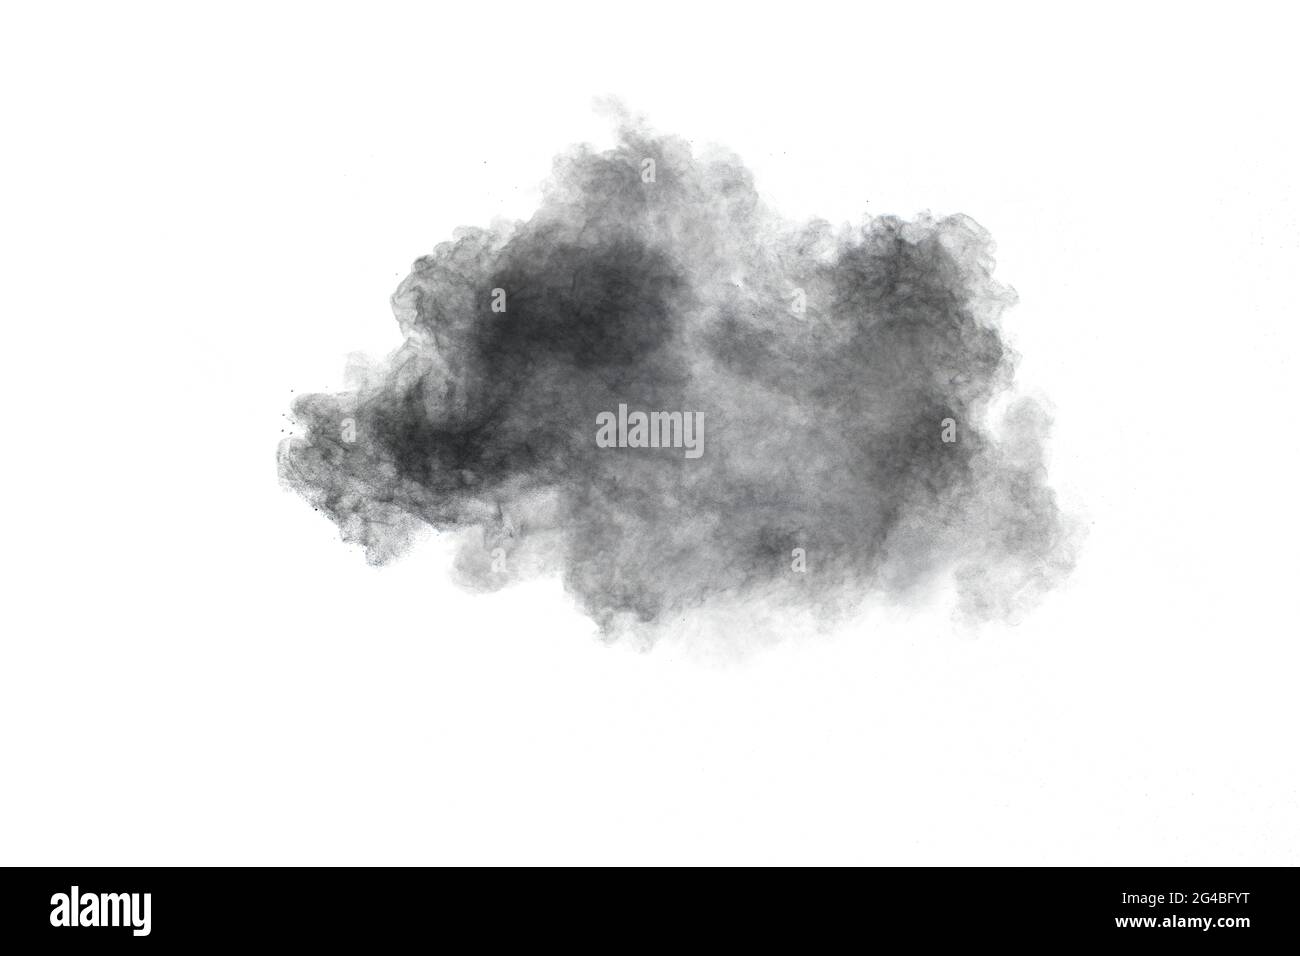 Black powder exploding.The particles of charcoal splash on white background. Stock Photo